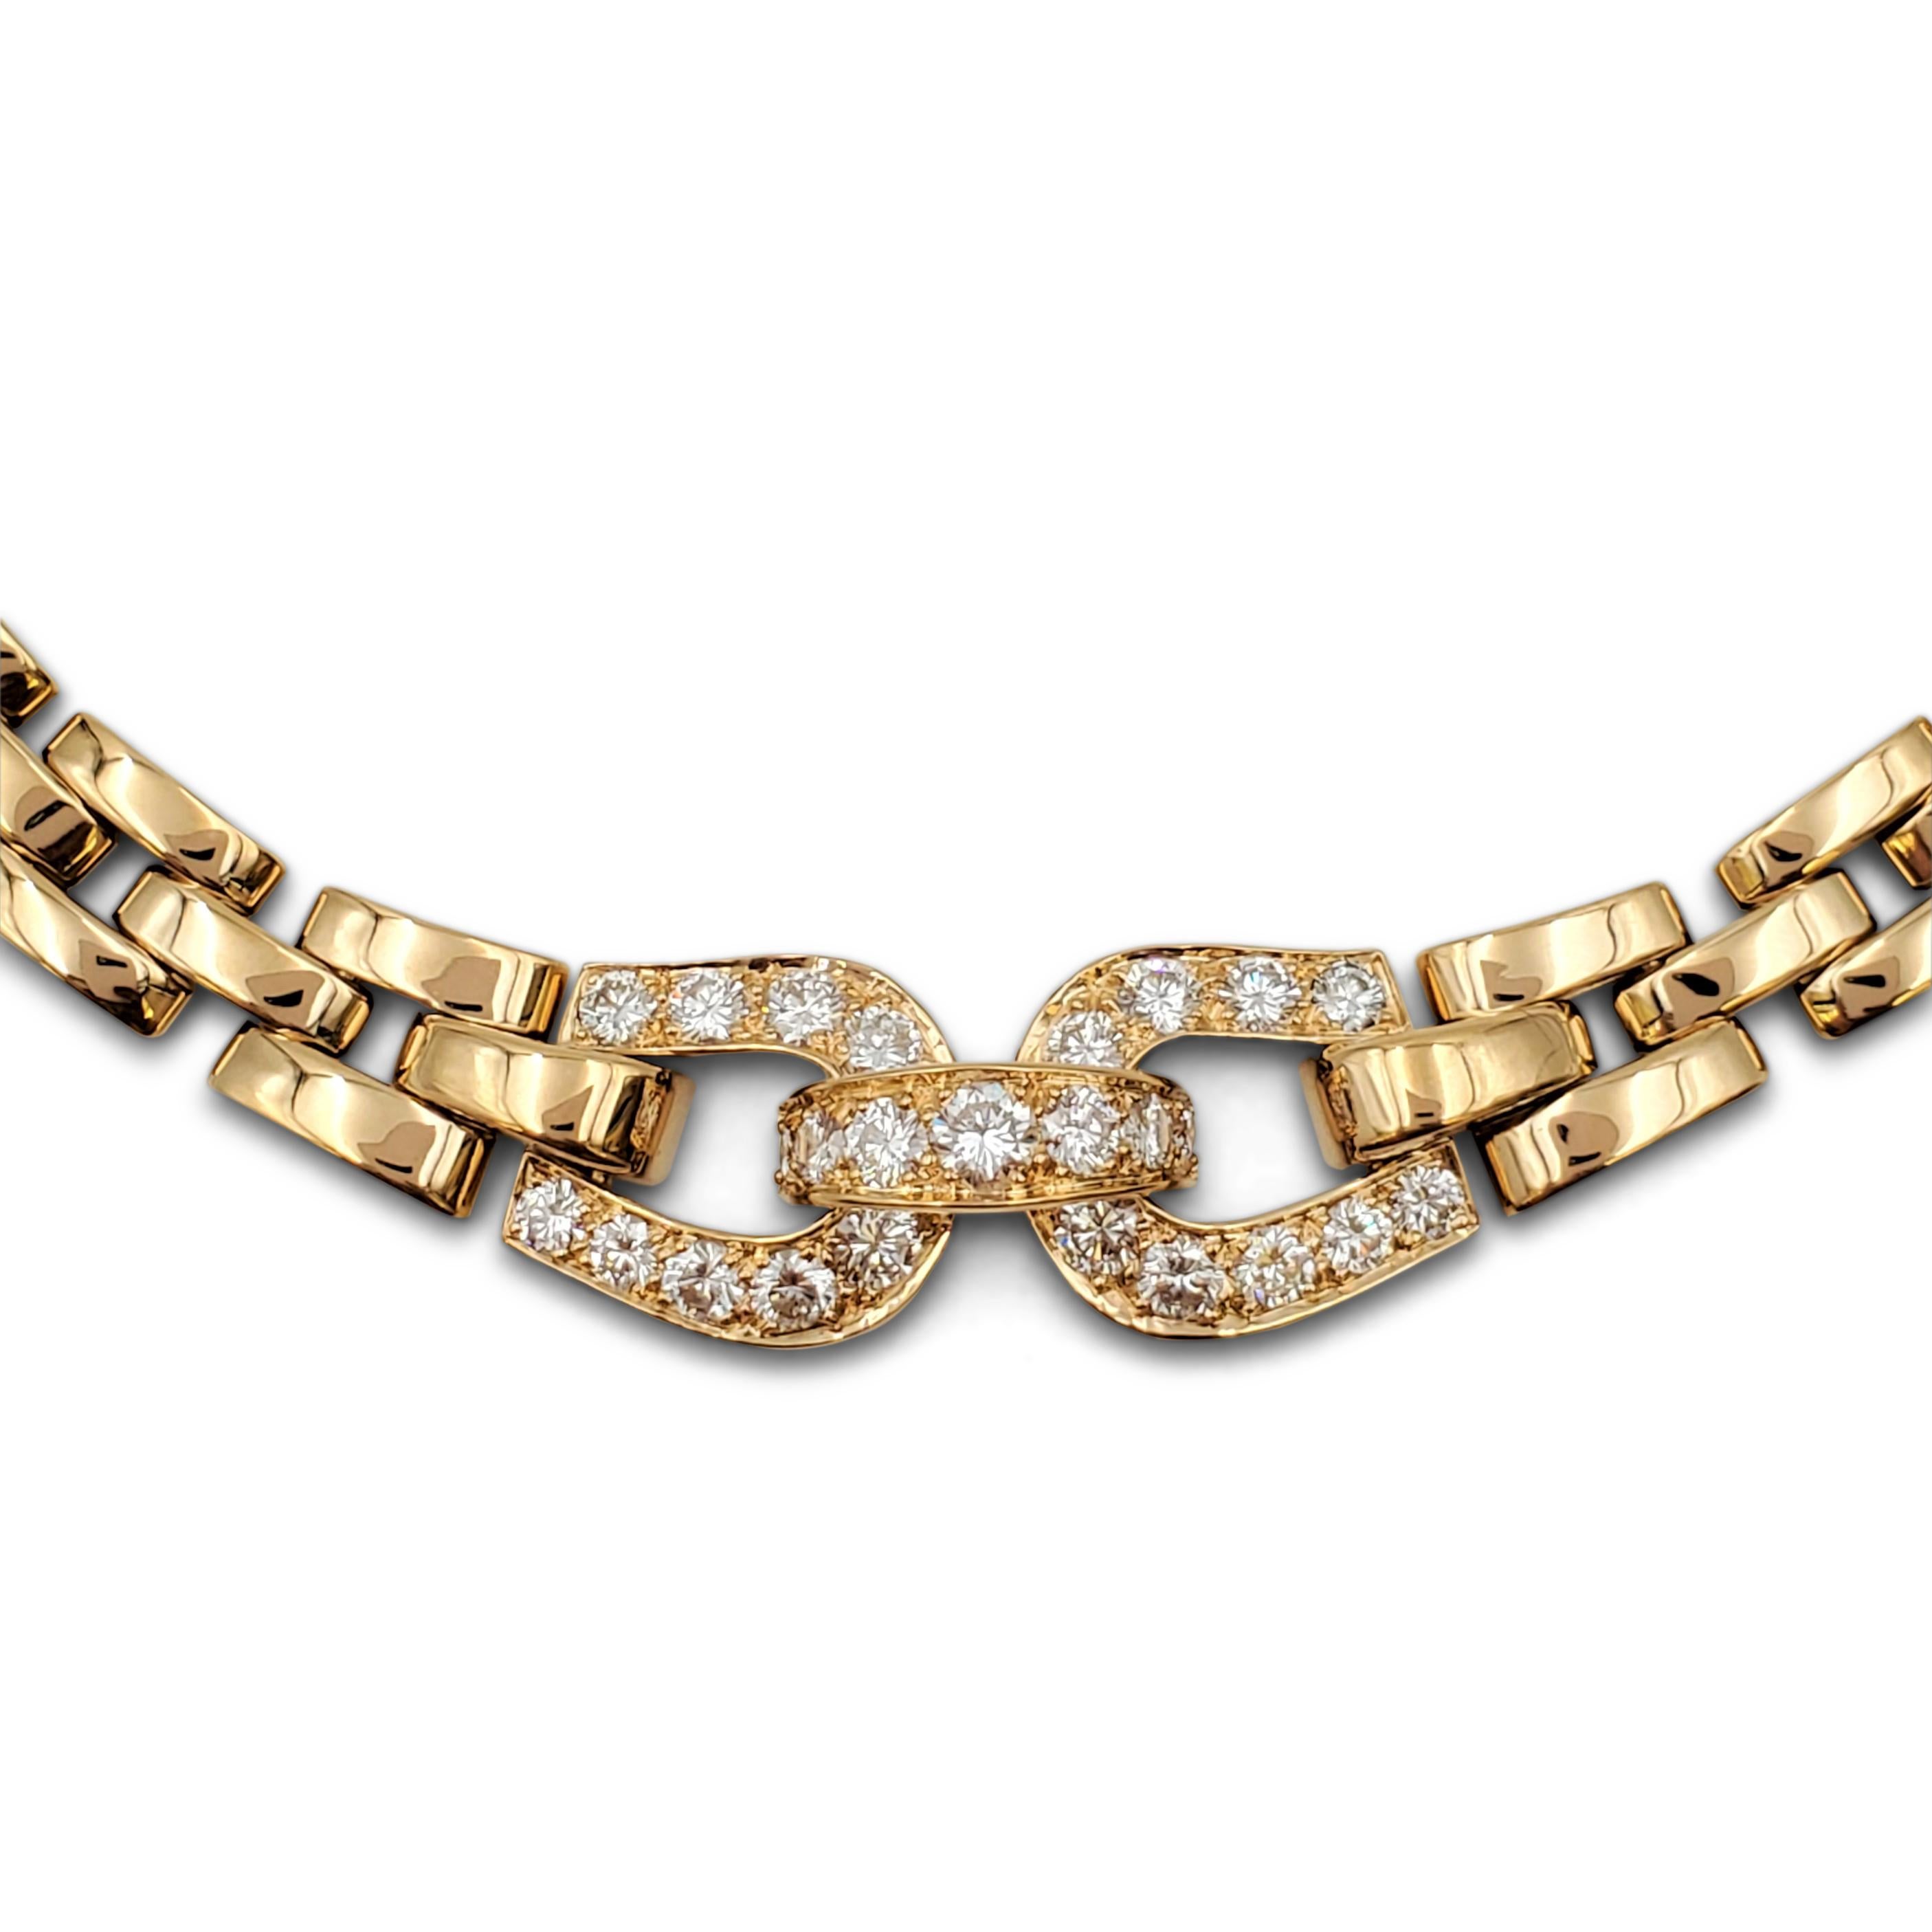 Authentic vintage Cartier 'Panthere Maillon' necklace crafted in 18 karat yellow gold is comprised of three uniform incurved links. The necklace centers on two horseshoe-shaped motifs connected by a curved link set with high-quality round brilliant